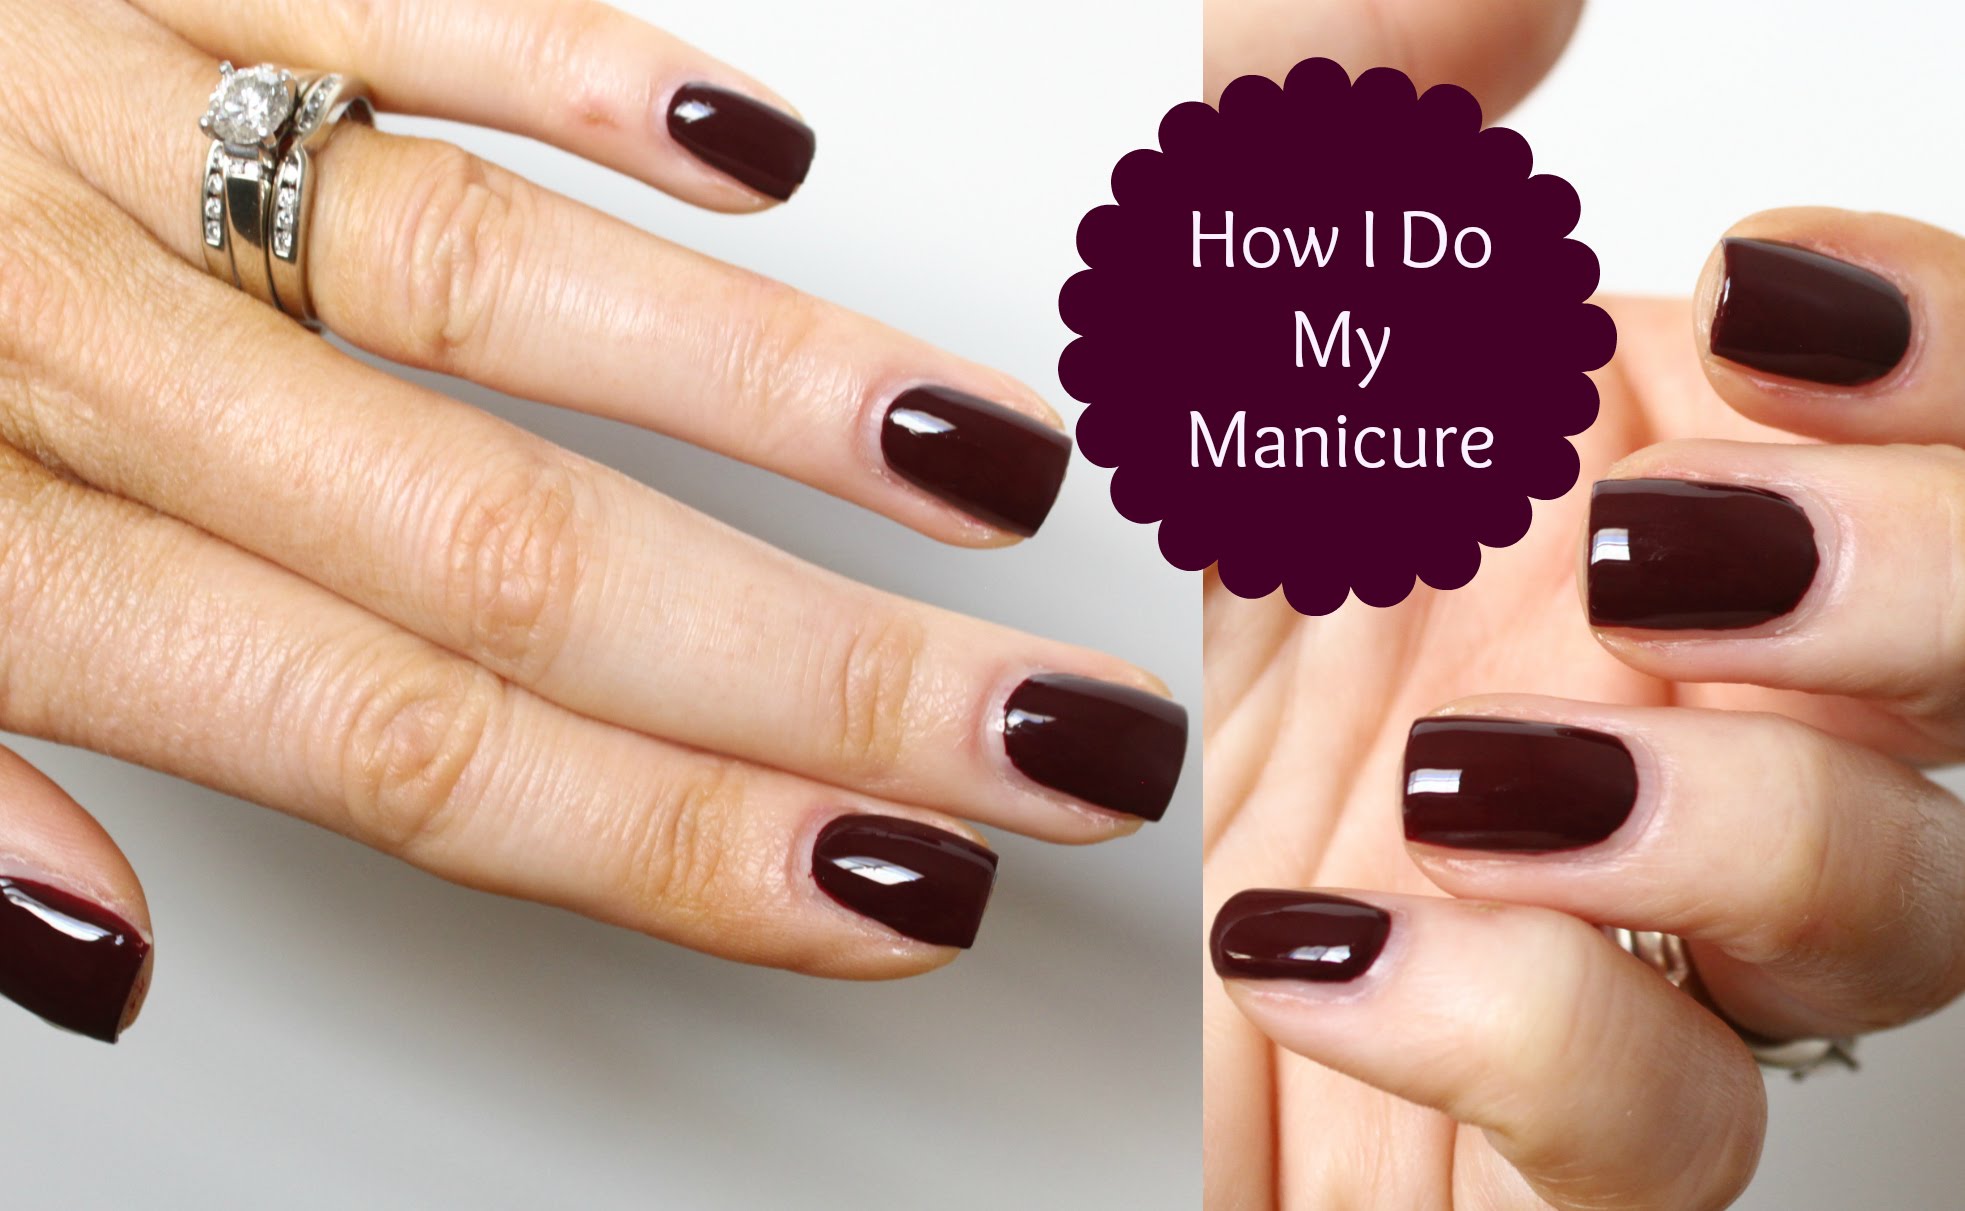 At home manicure tutorial